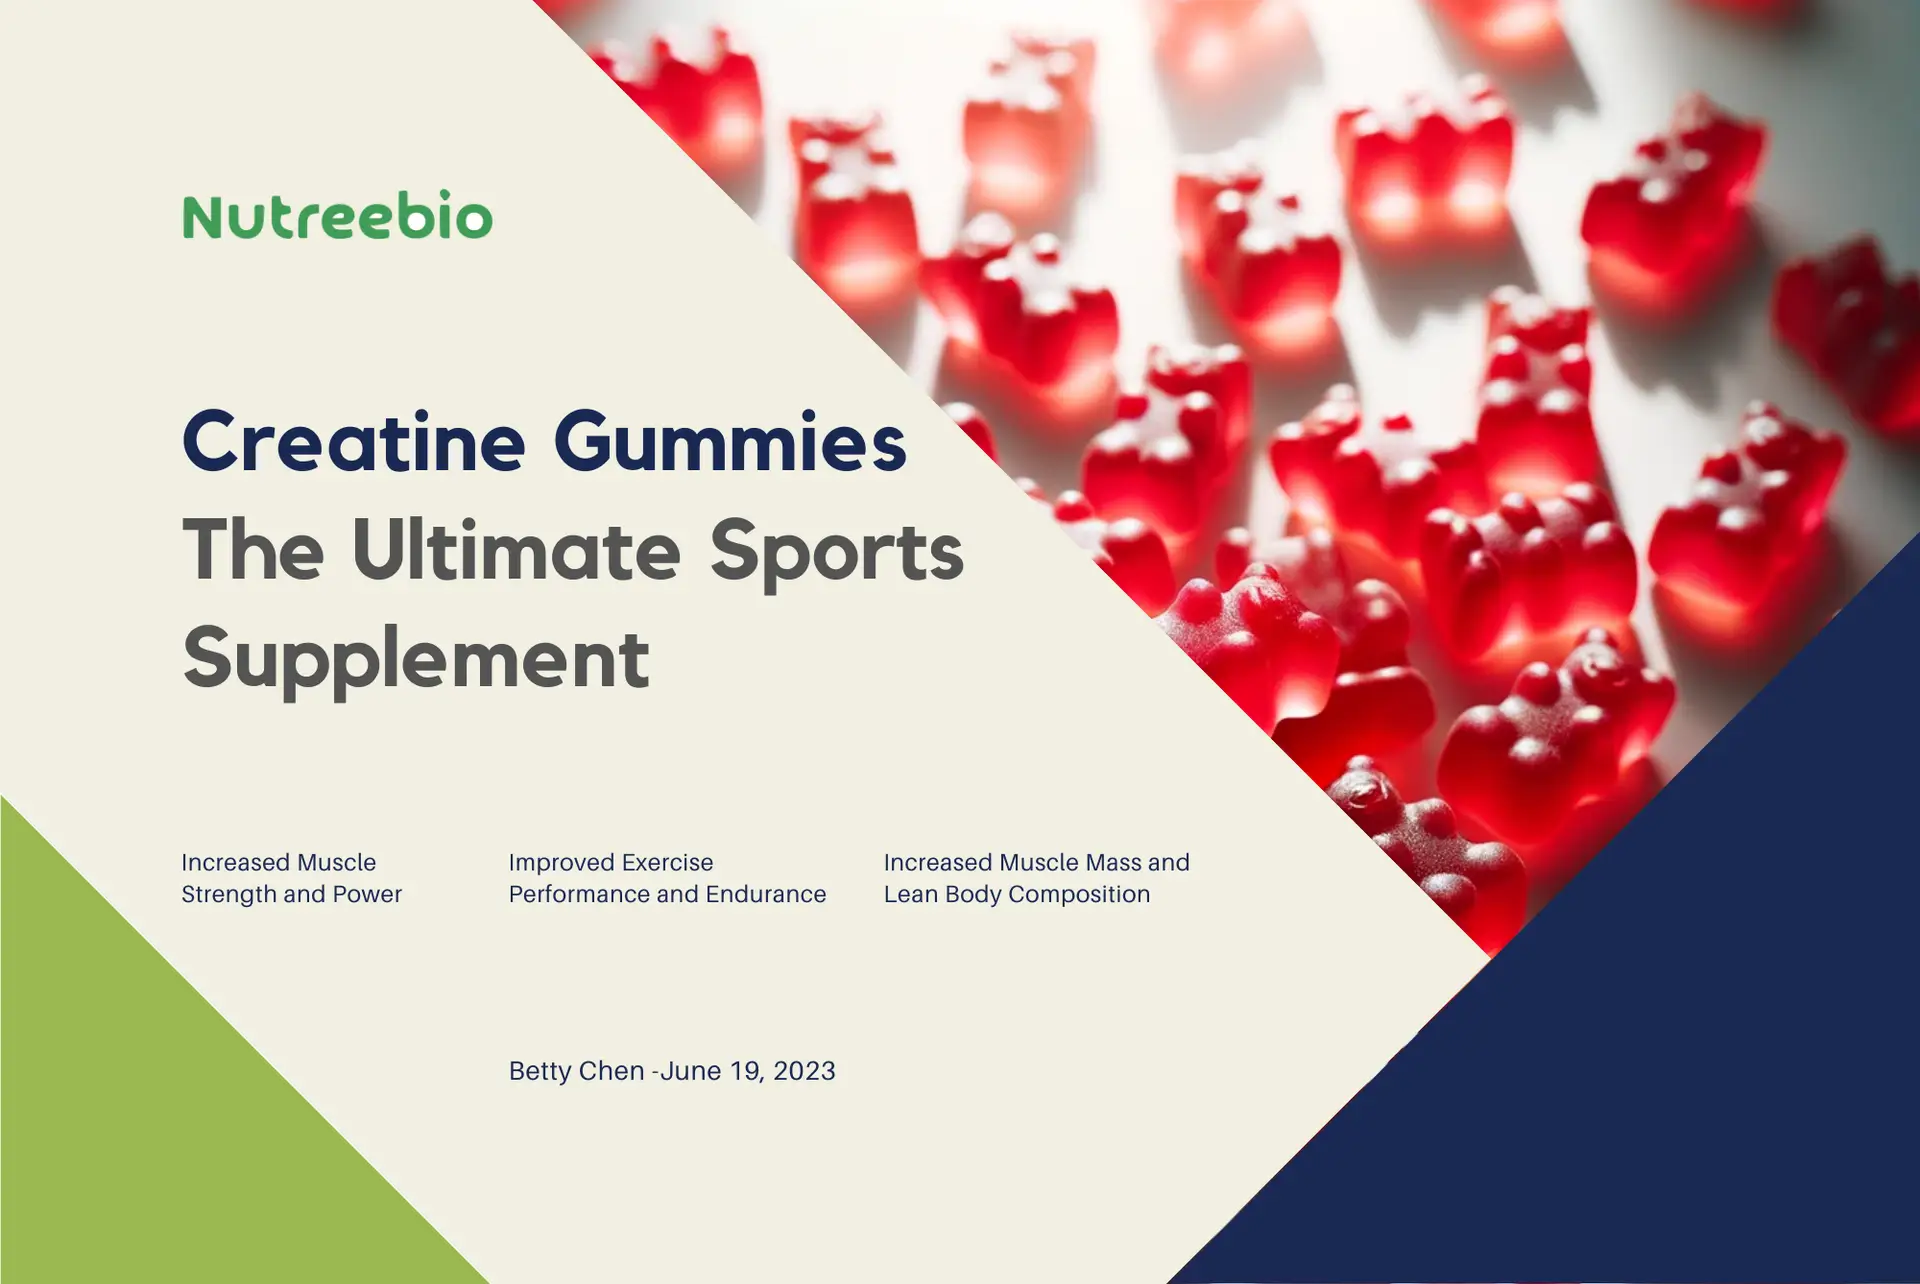 Boost Your Performance with Creatine Gummies: The Ultimate Sports Supplement